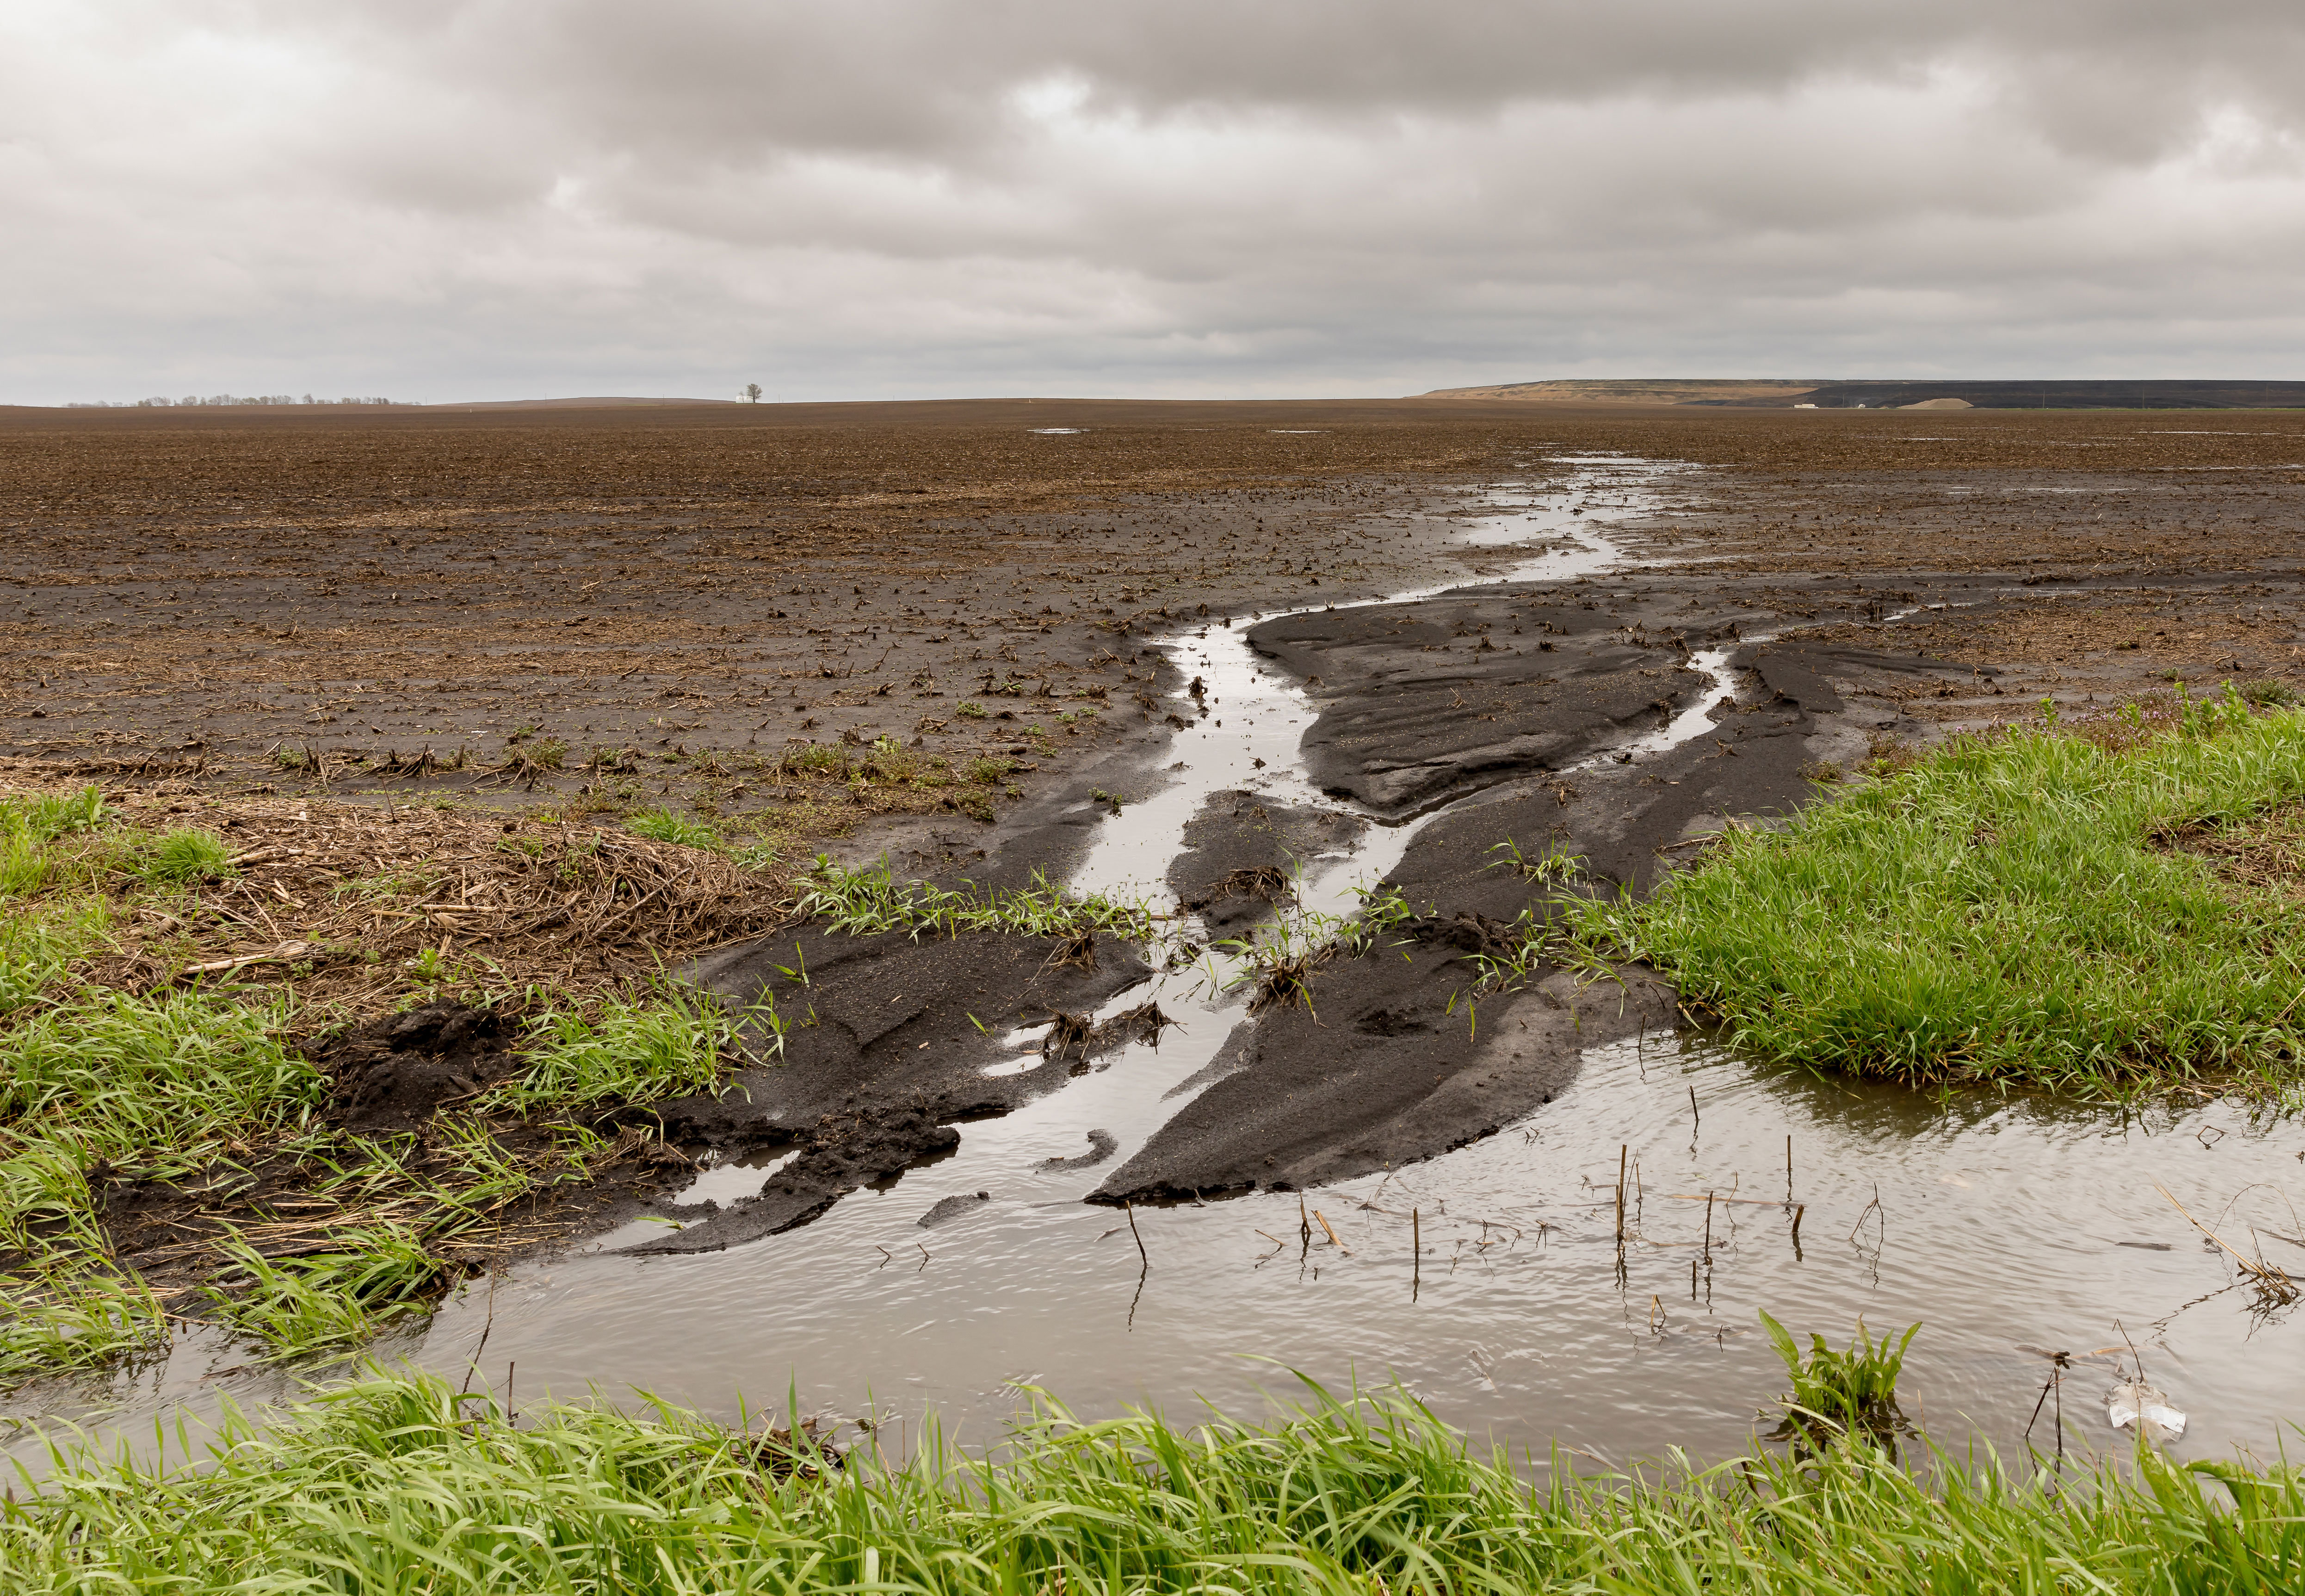 A wet, unplanted field with water pooling and running off into a ditch.